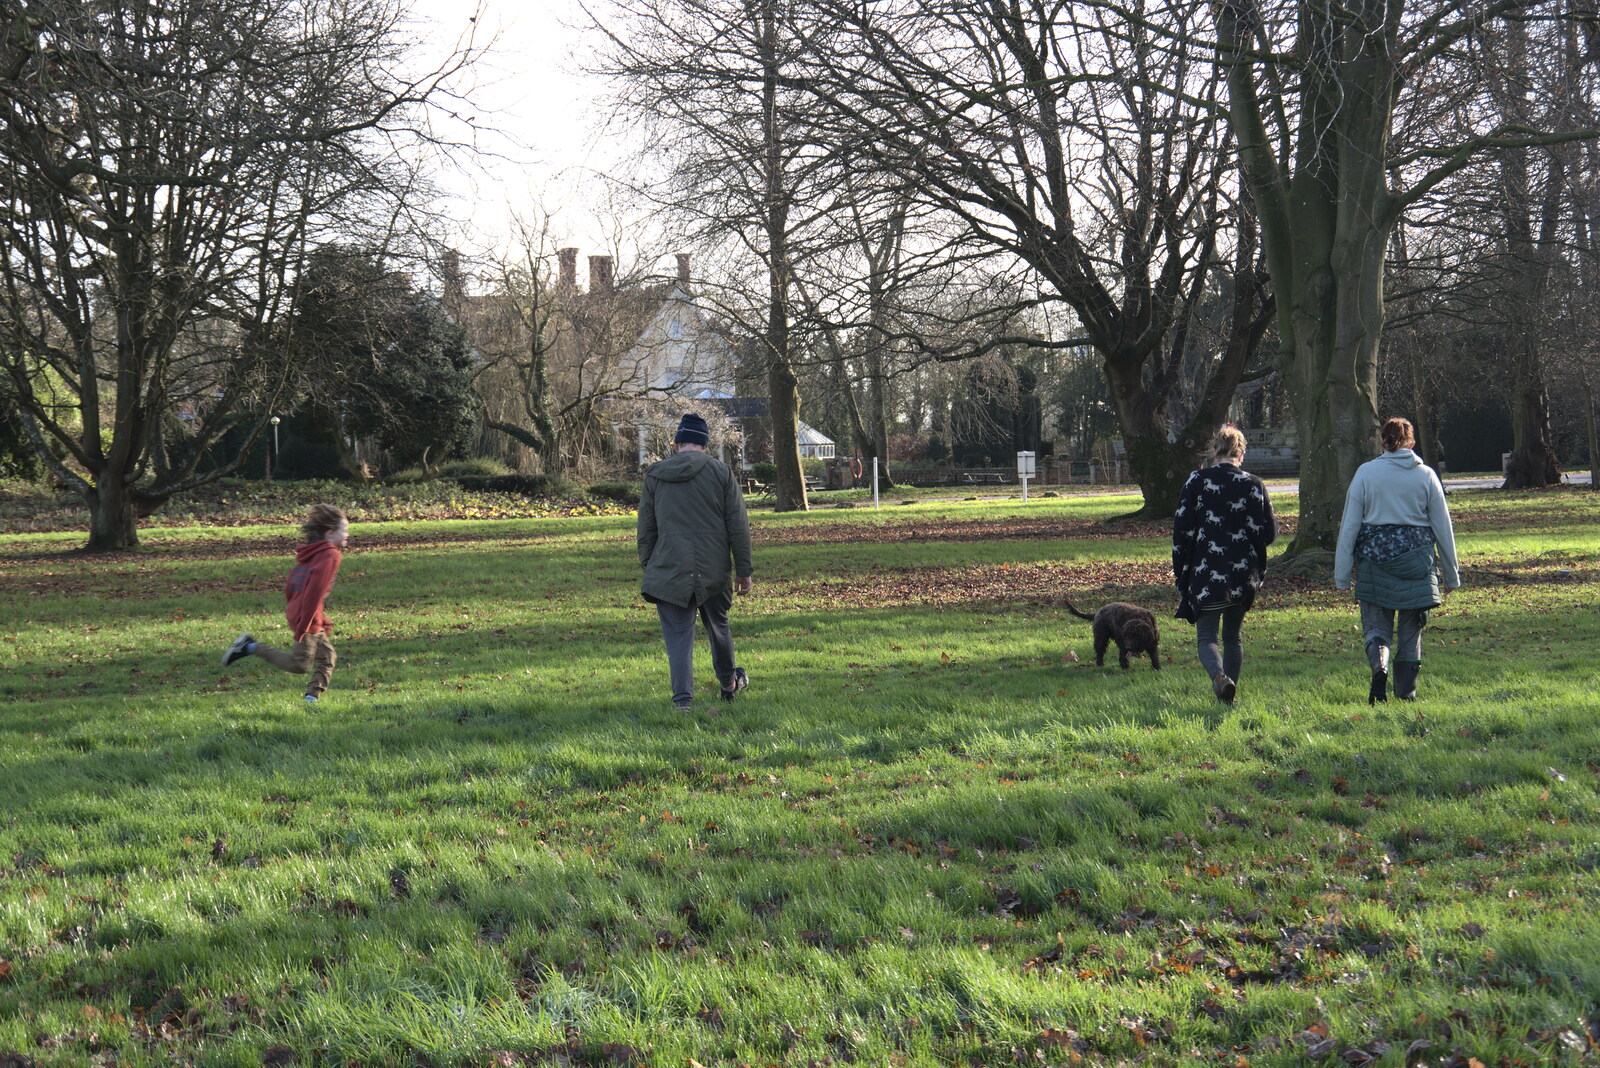 Benson runs across the Oaksmere's field from New Year's Day, Brome, Suffolk - 1st January 2022